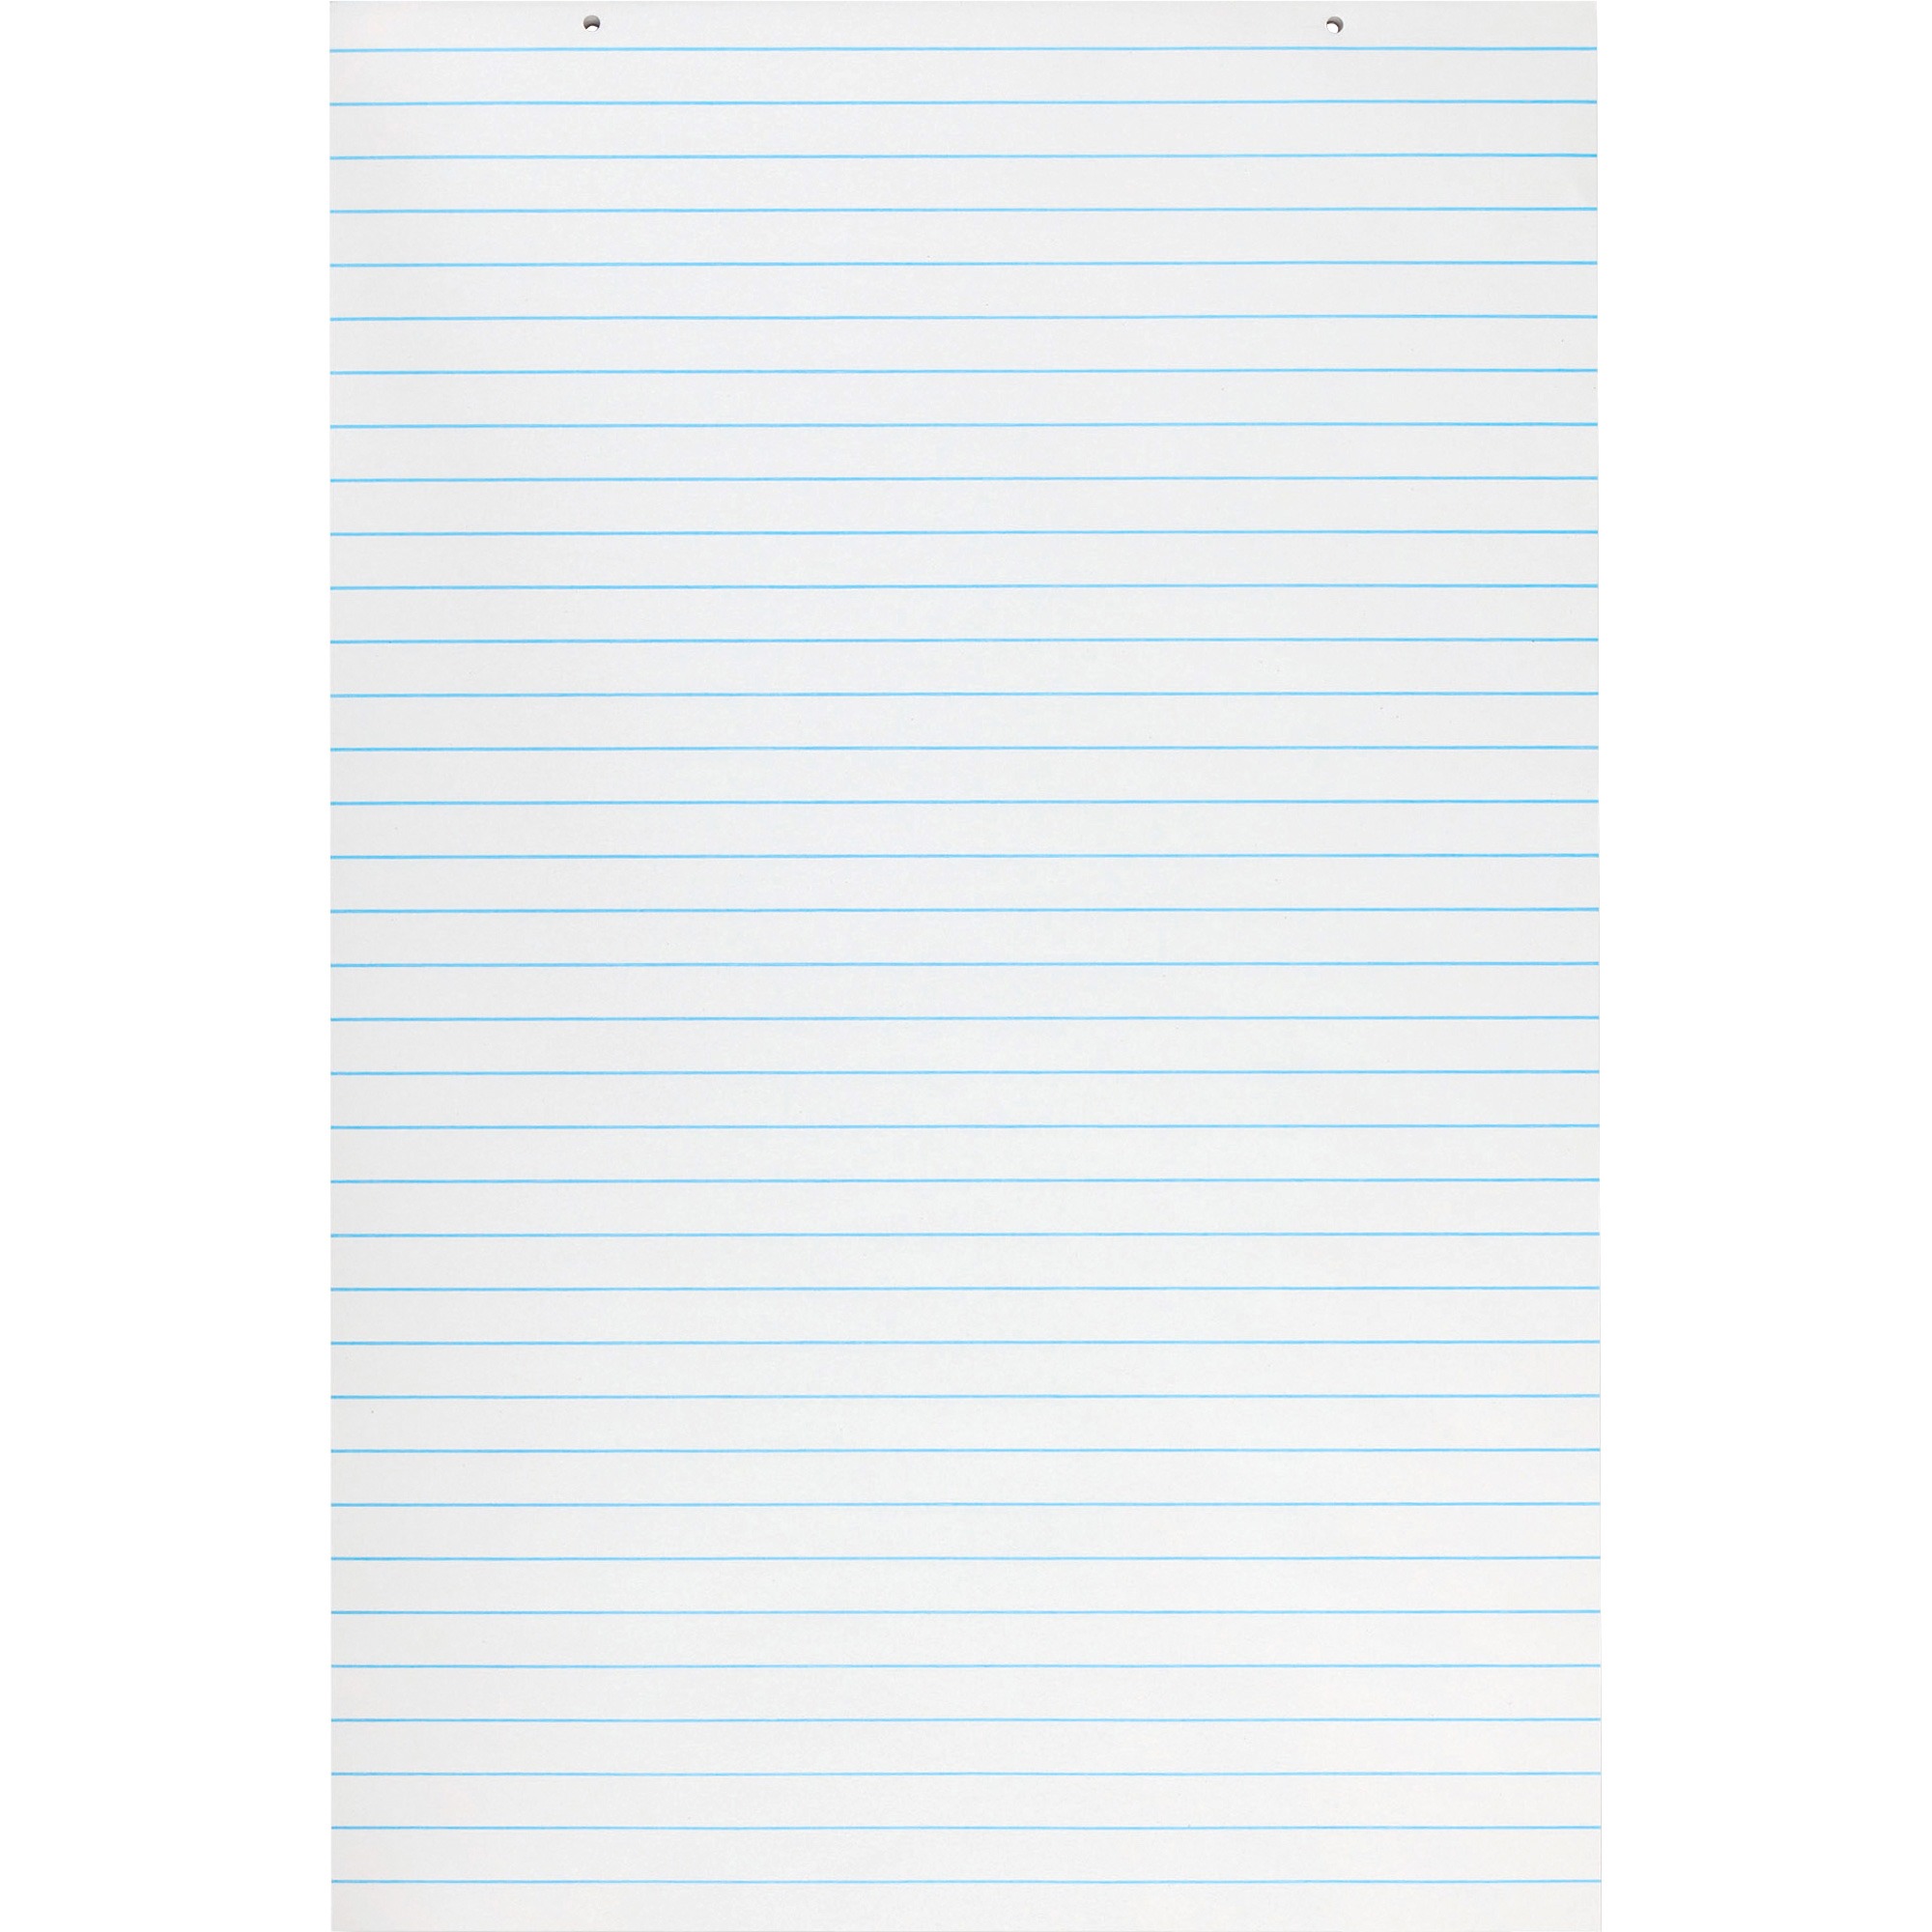 Primary Chart Pad, White, 1" Ruled Short Way, 24" x 36", 100 Sheets